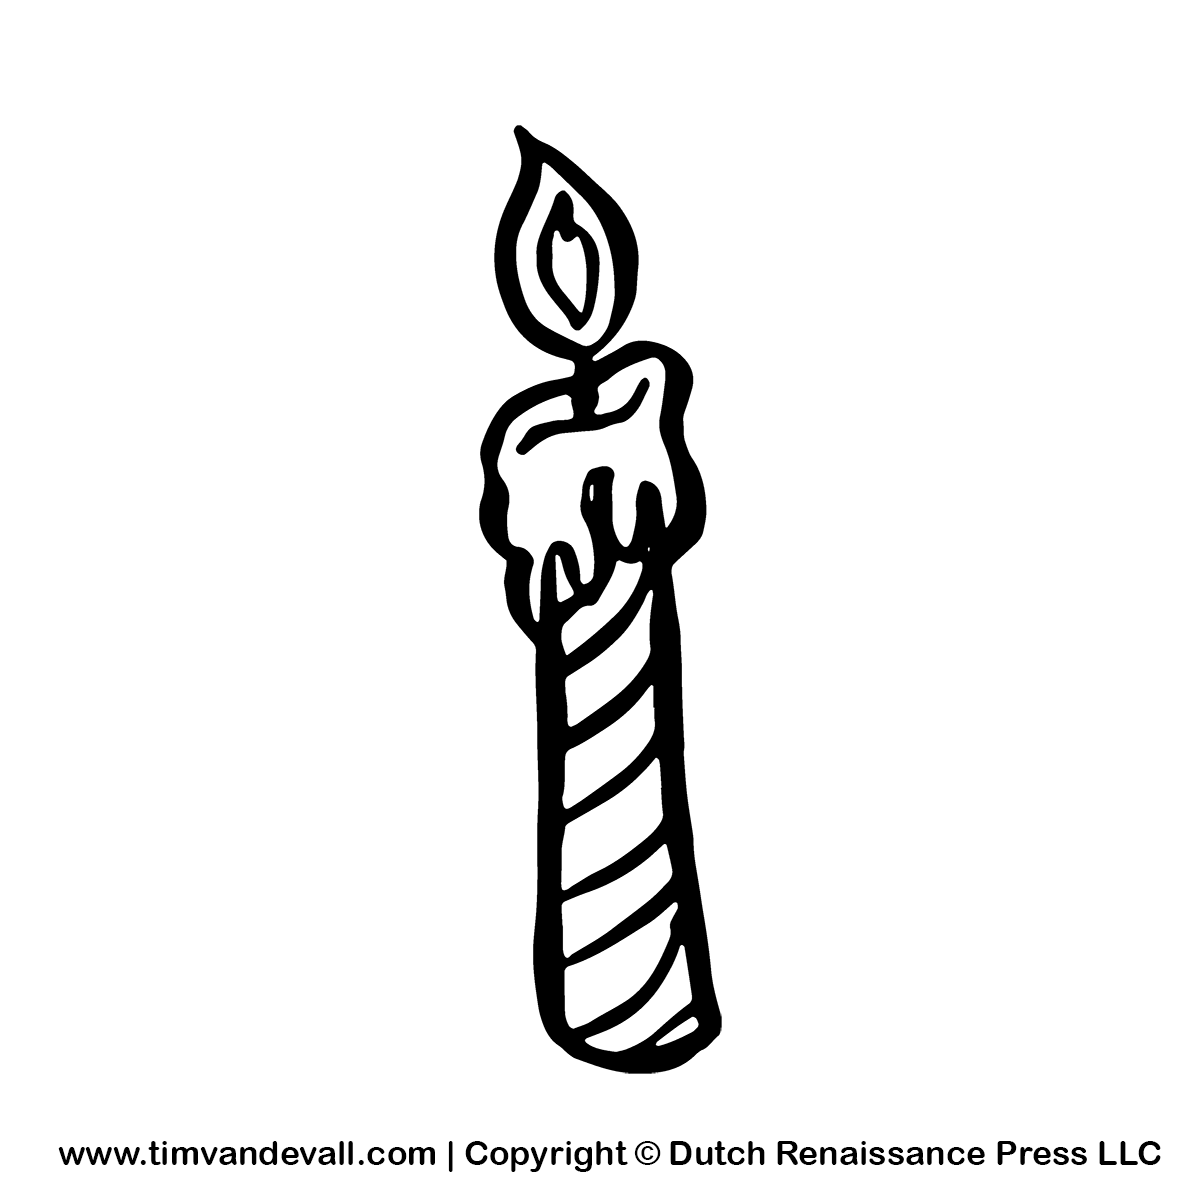 Candle clip art black and white 